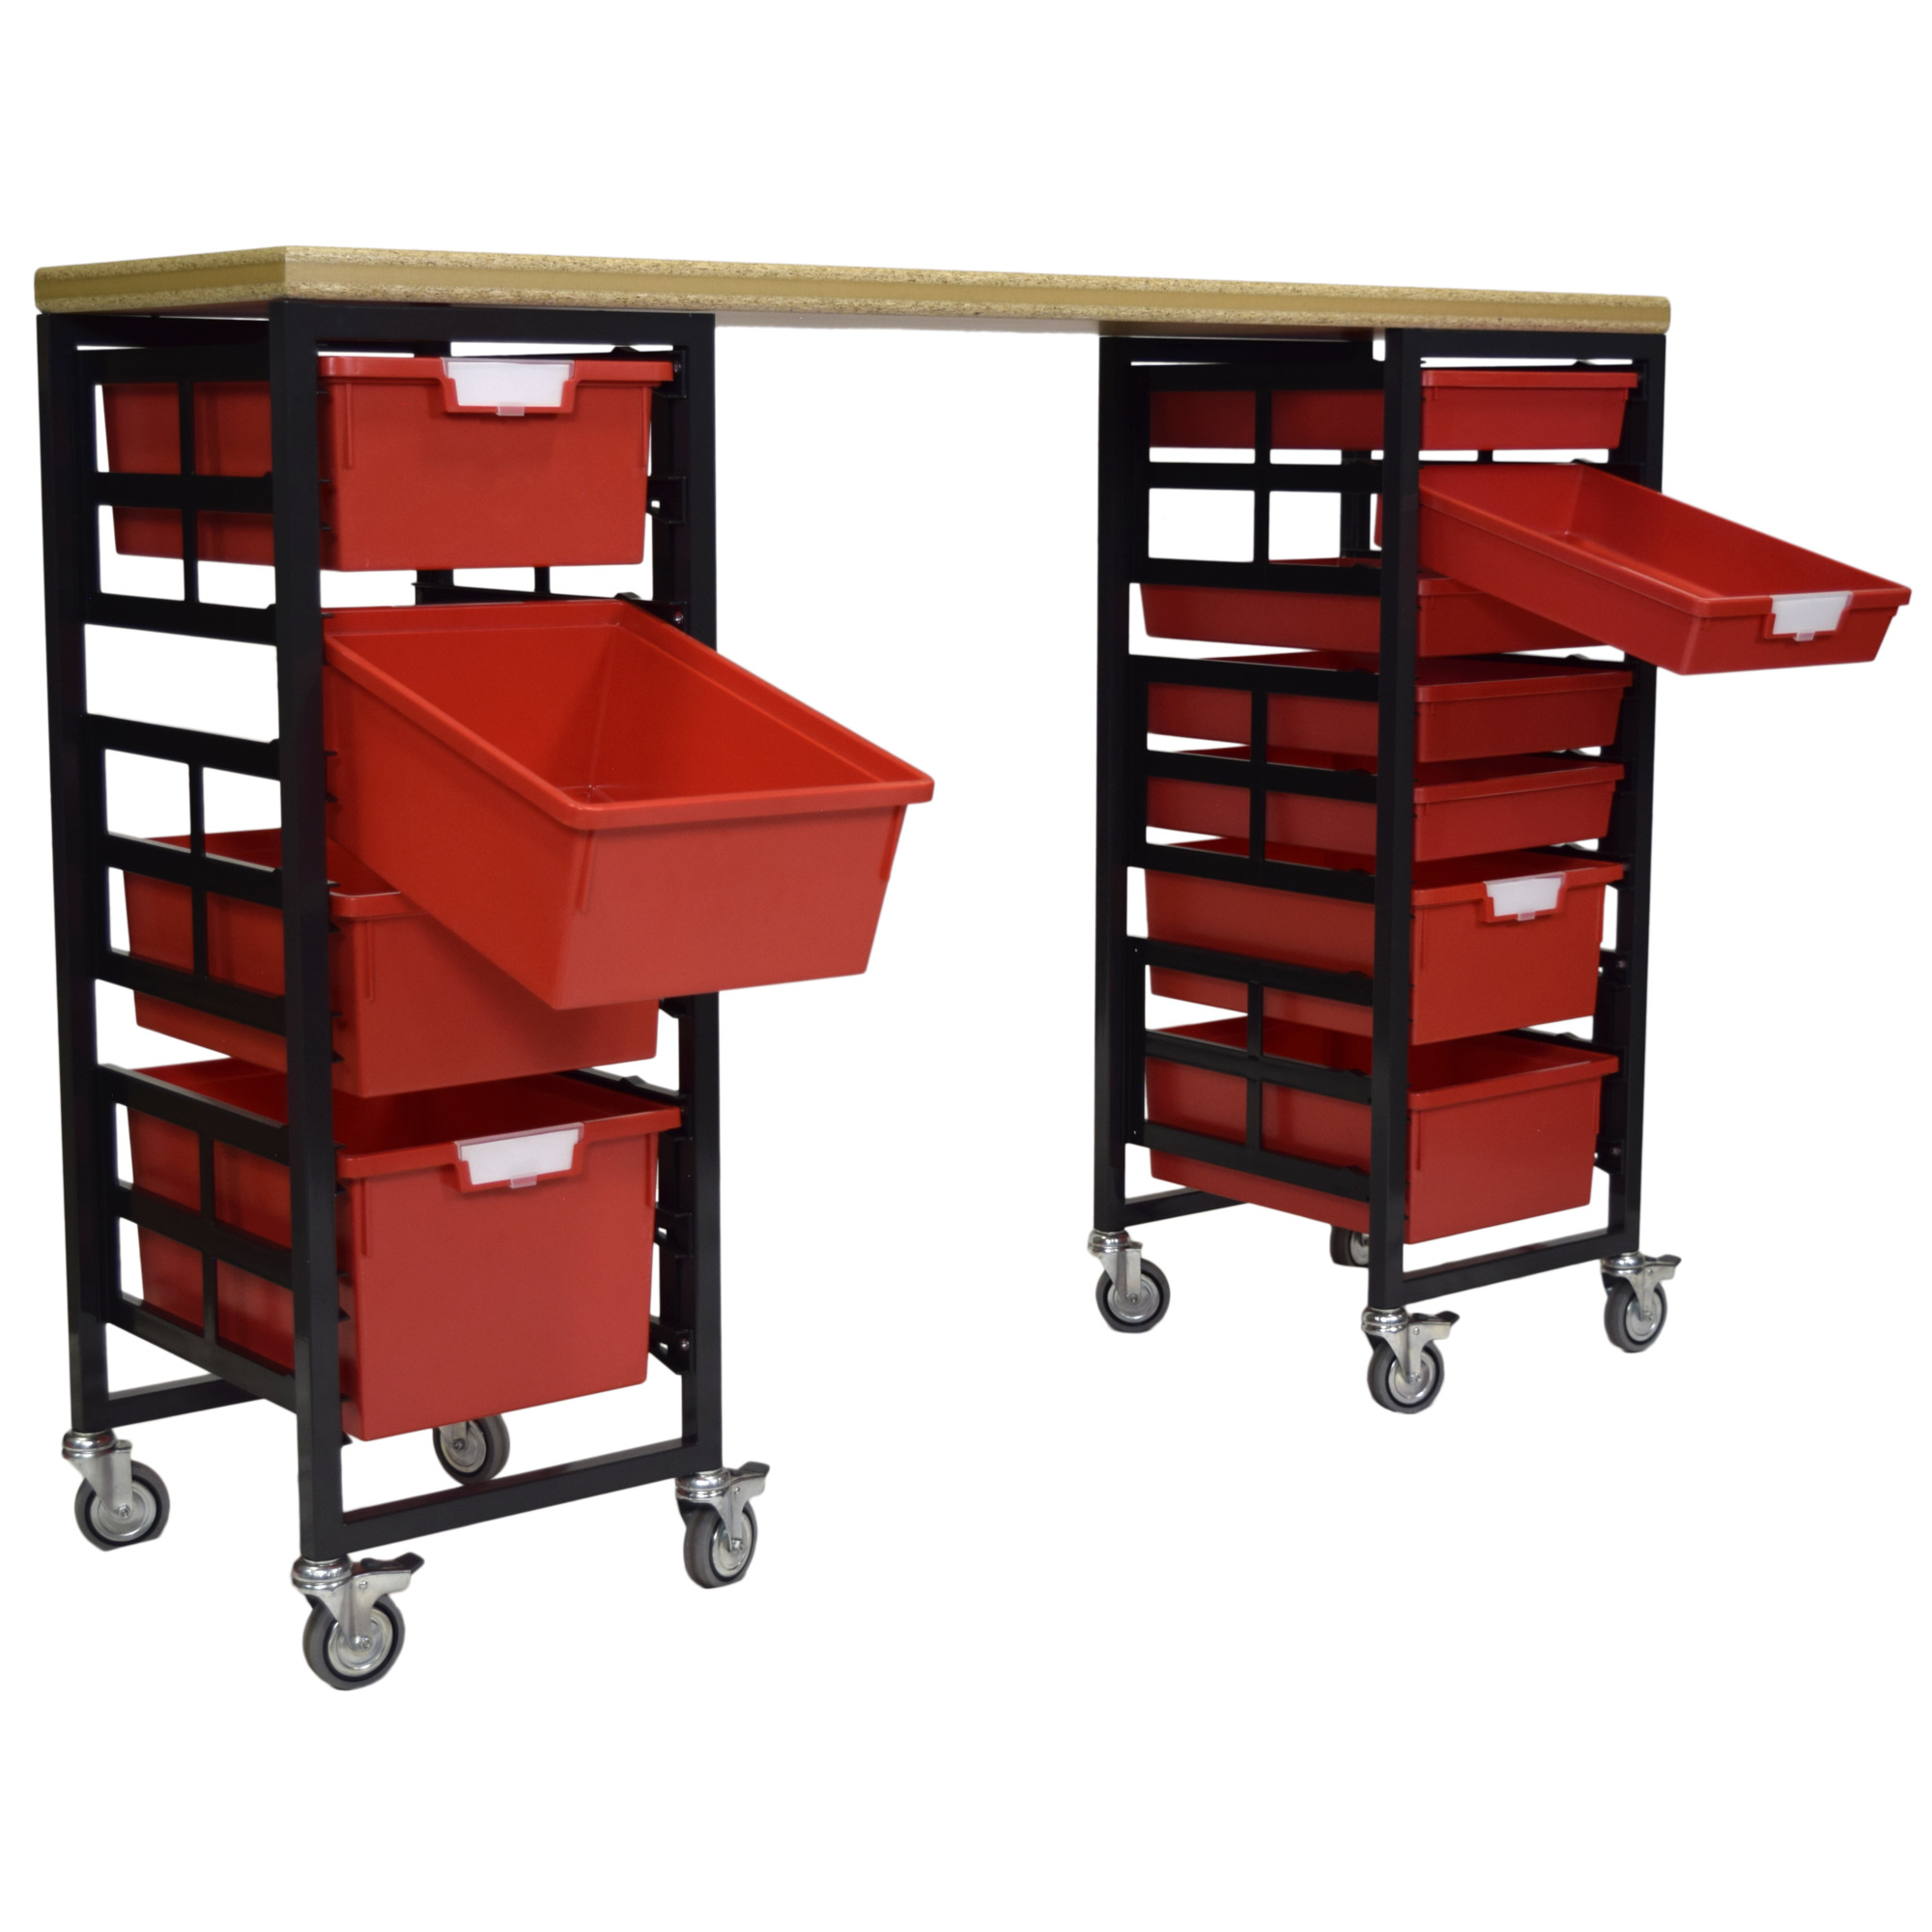 Certwood StorWerks, Mobile Workbench Station w/Wood Top -11 Trays-Red, Included (qty.) 11, Material Plastic, Height 6 in, Model CE2097DGGC-WB5S5D1TPR